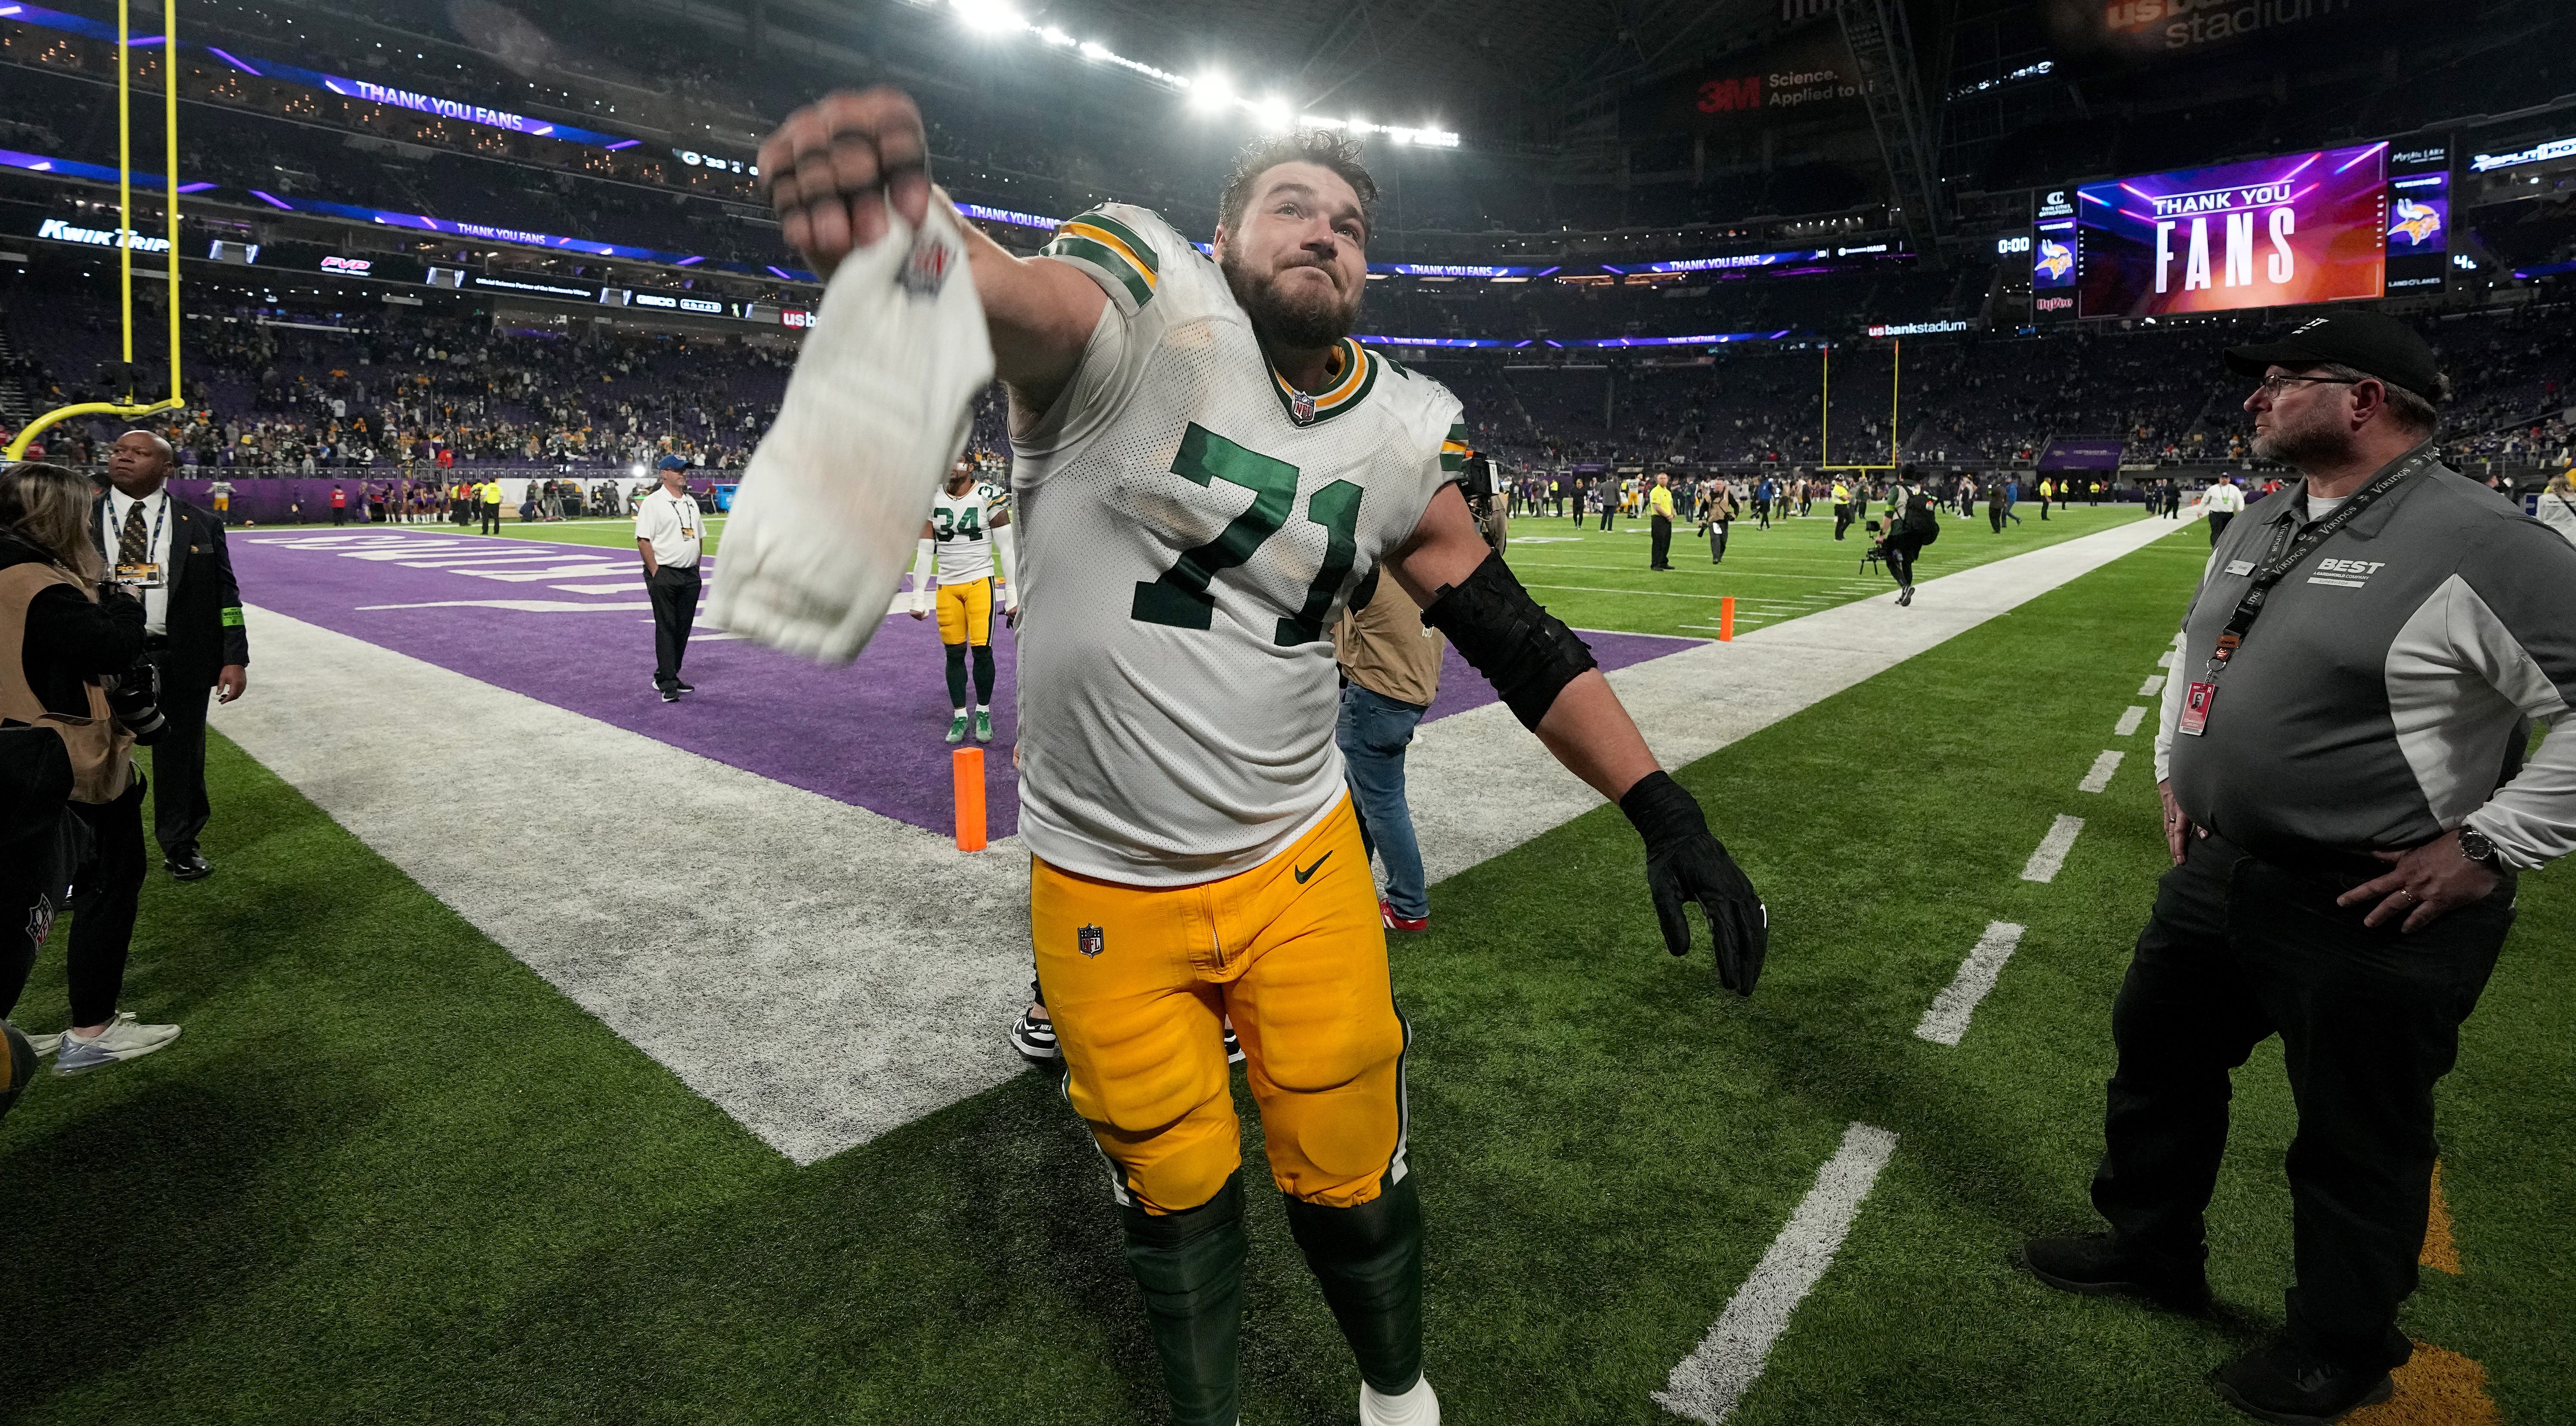 Green Bay Packers center Josh Myers (71) throws a towel into the stands while celebrating his team’s win after their game Sunday, December 31, 2023 at U.S. Bank Stadium in Minneapolis, Minnesota. The Green Bay Packers beat the Minnesota Vikings 33-10.